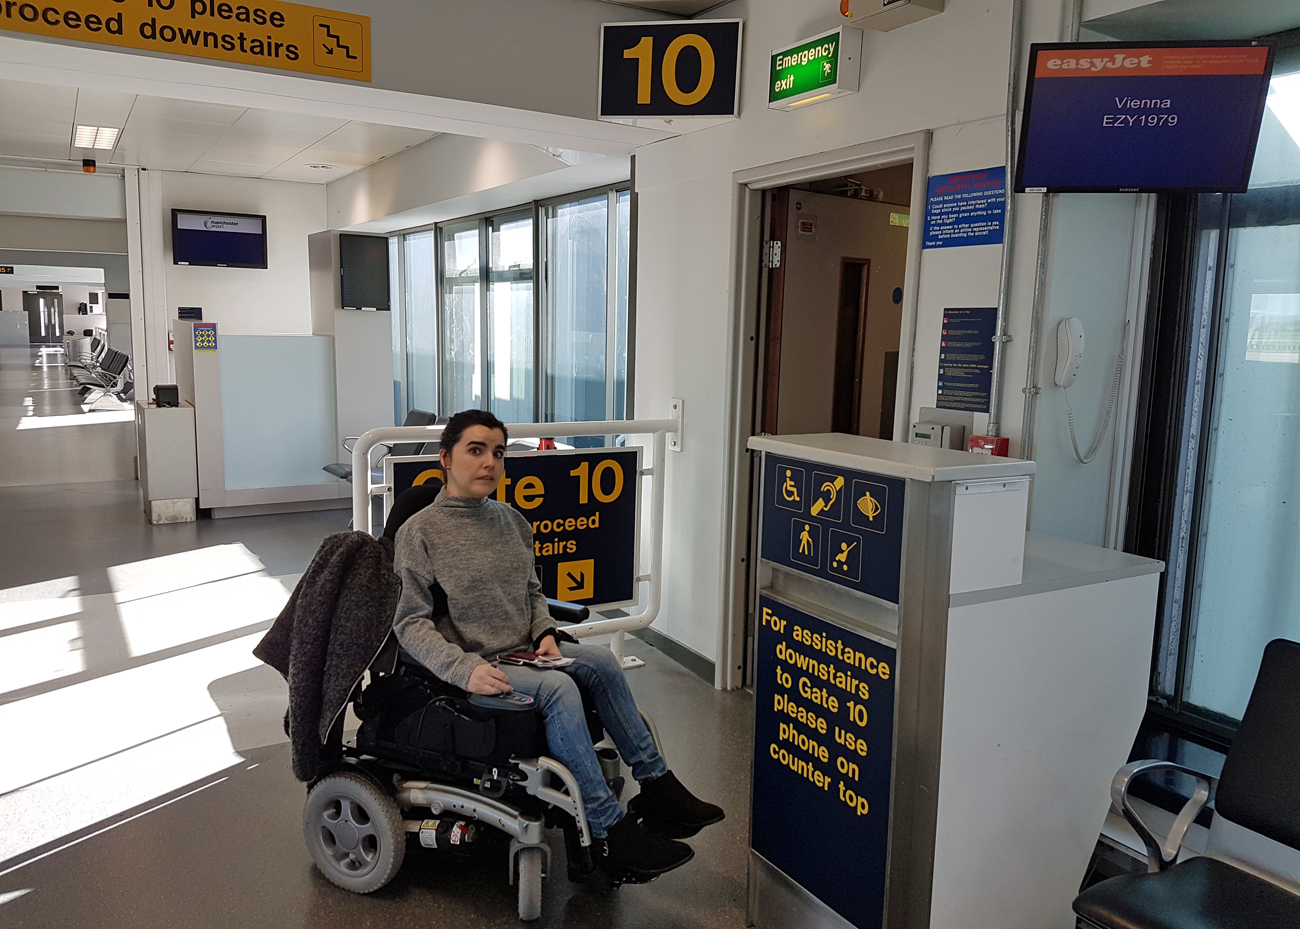 Vienna Photo Diary Manchester Airport wheelchair user at boarding gate